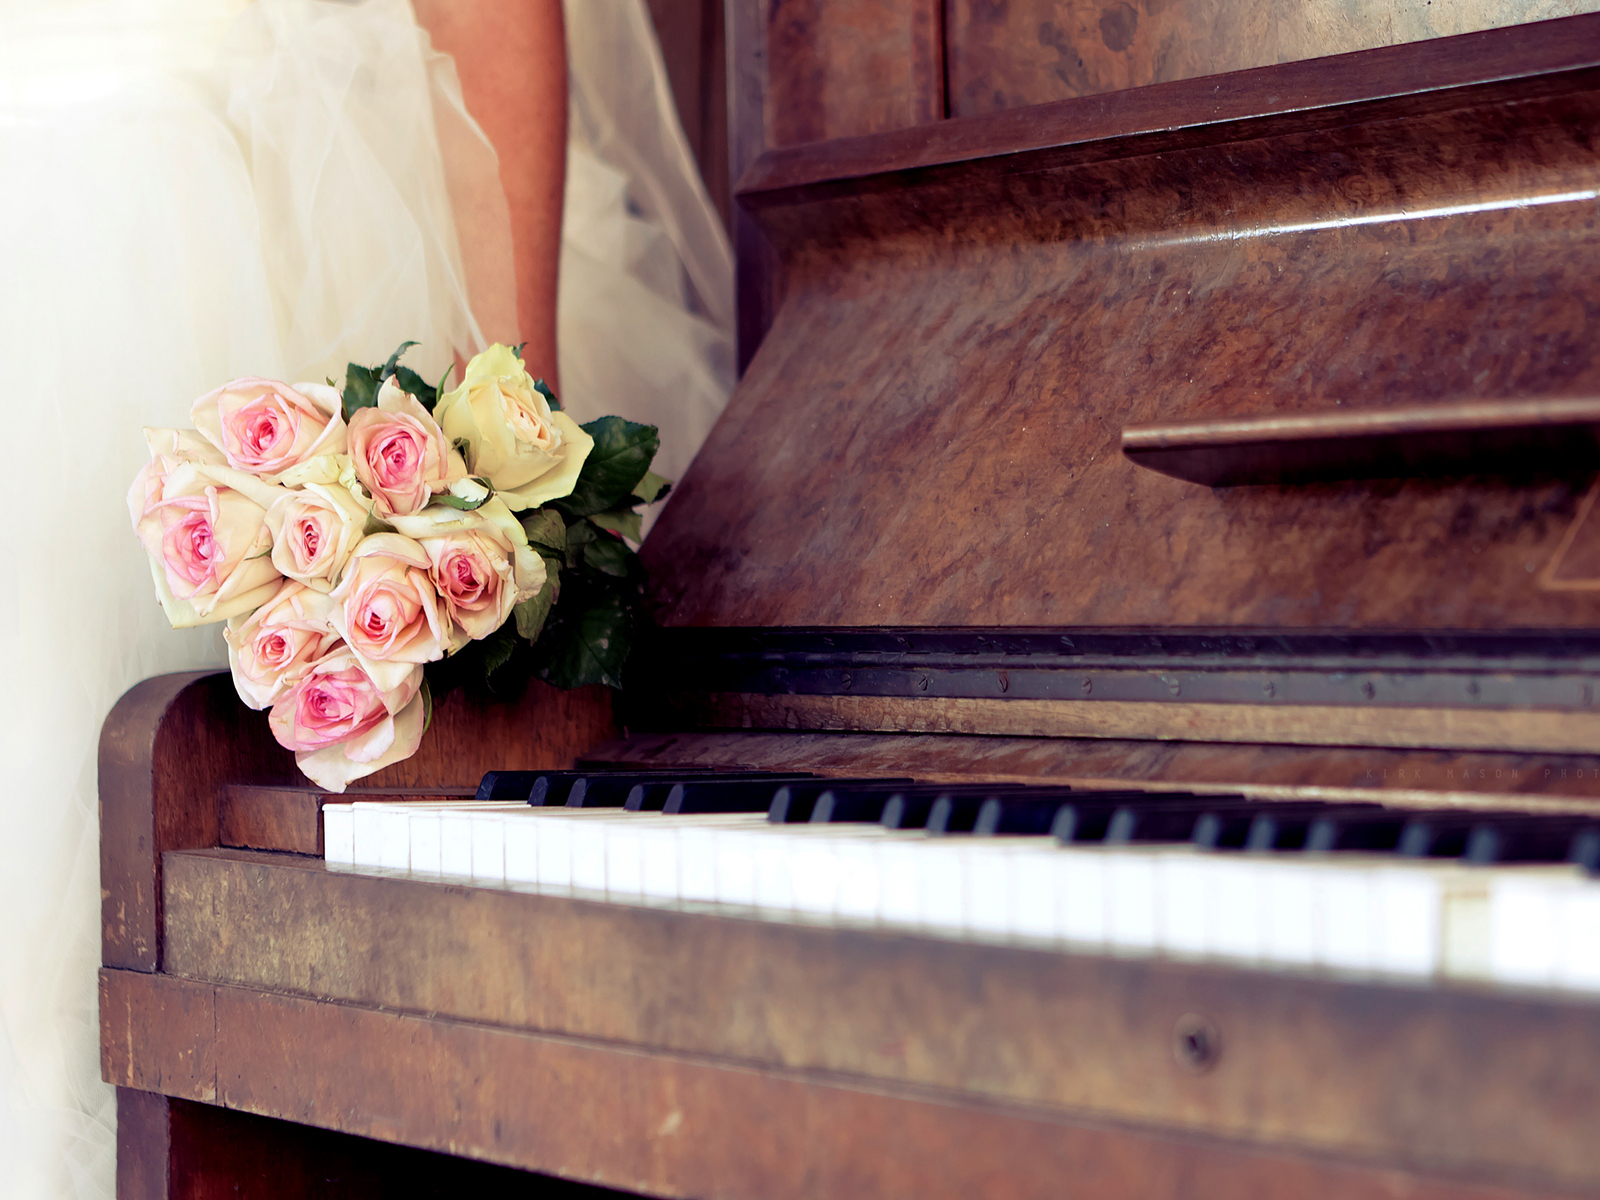 Piano And A Bouquet Of Pink Roses Holding Bride HD Desktop Wallpaper